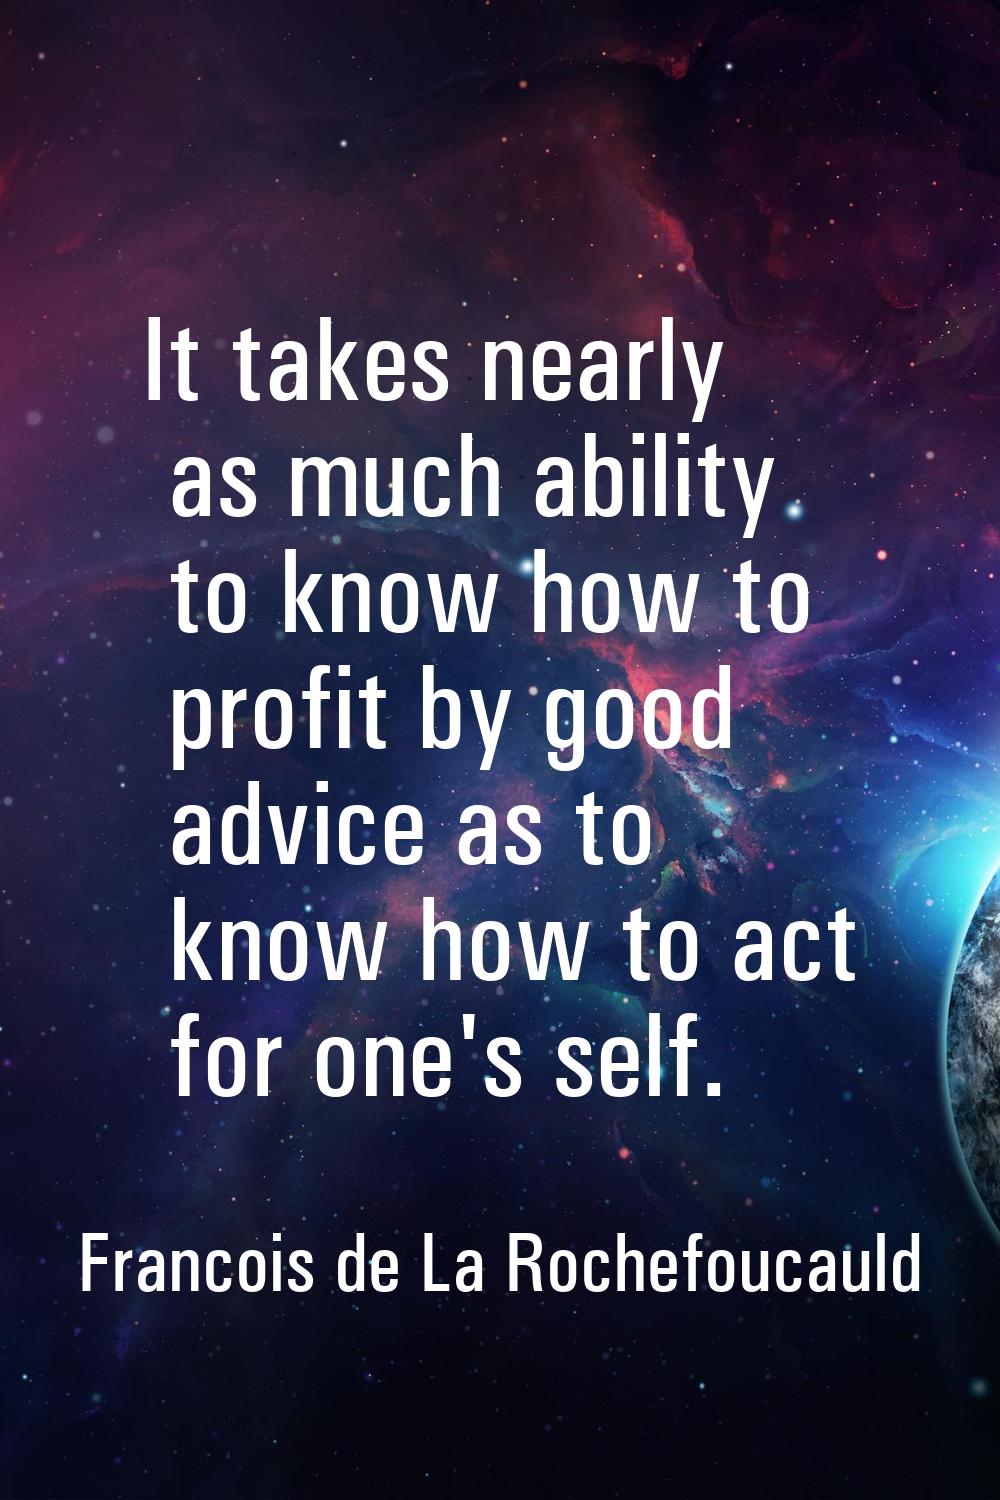 It takes nearly as much ability to know how to profit by good advice as to know how to act for one'